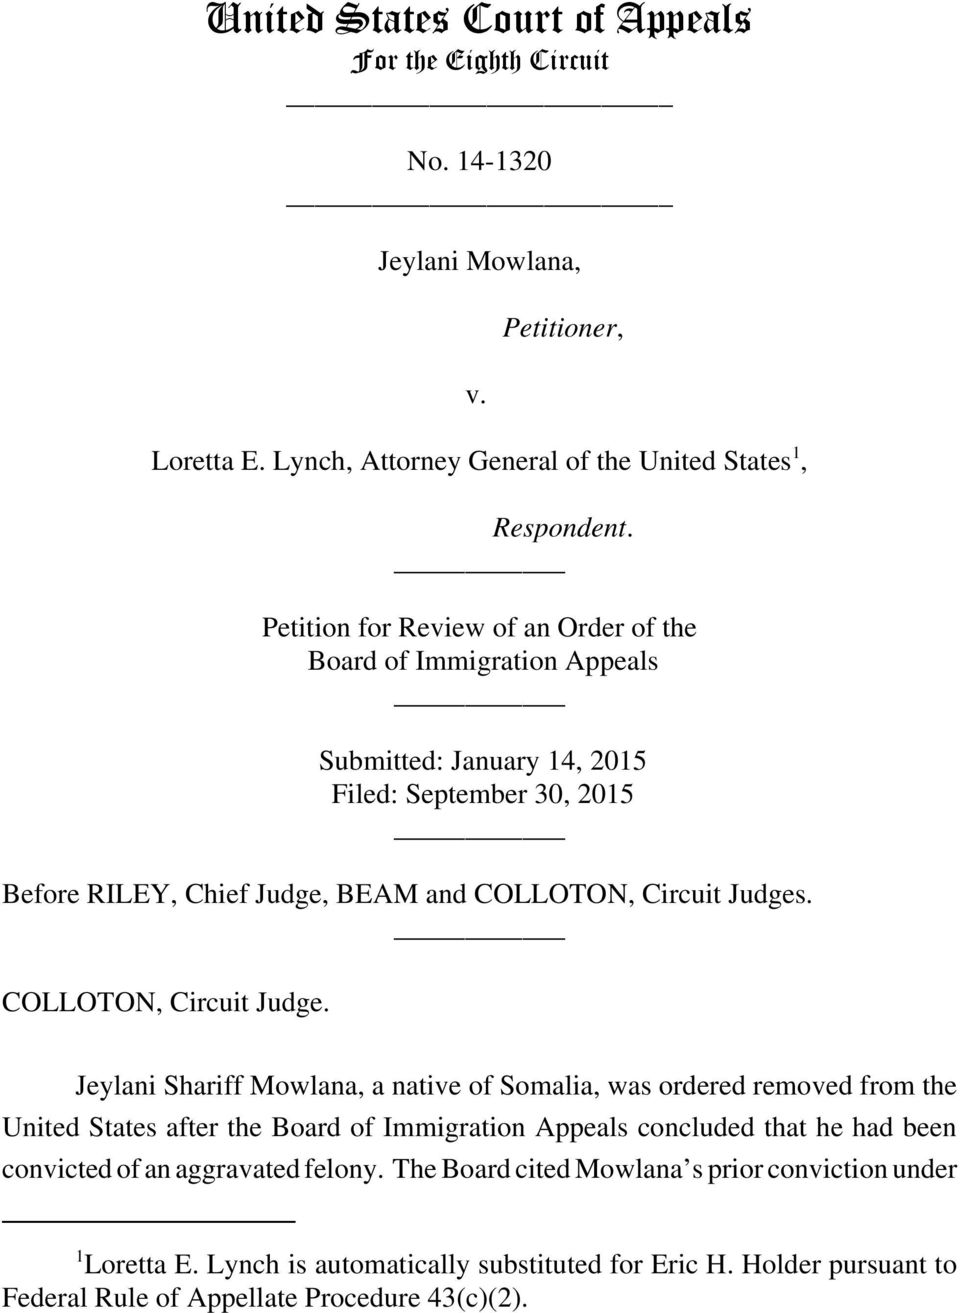 Petition for Review of an Order of the Board of Immigration Appeals Submitted: January 14, 2015 Filed: September 30, 2015 Before RILEY, Chief Judge, BEAM and COLLOTON, Circuit Judges.